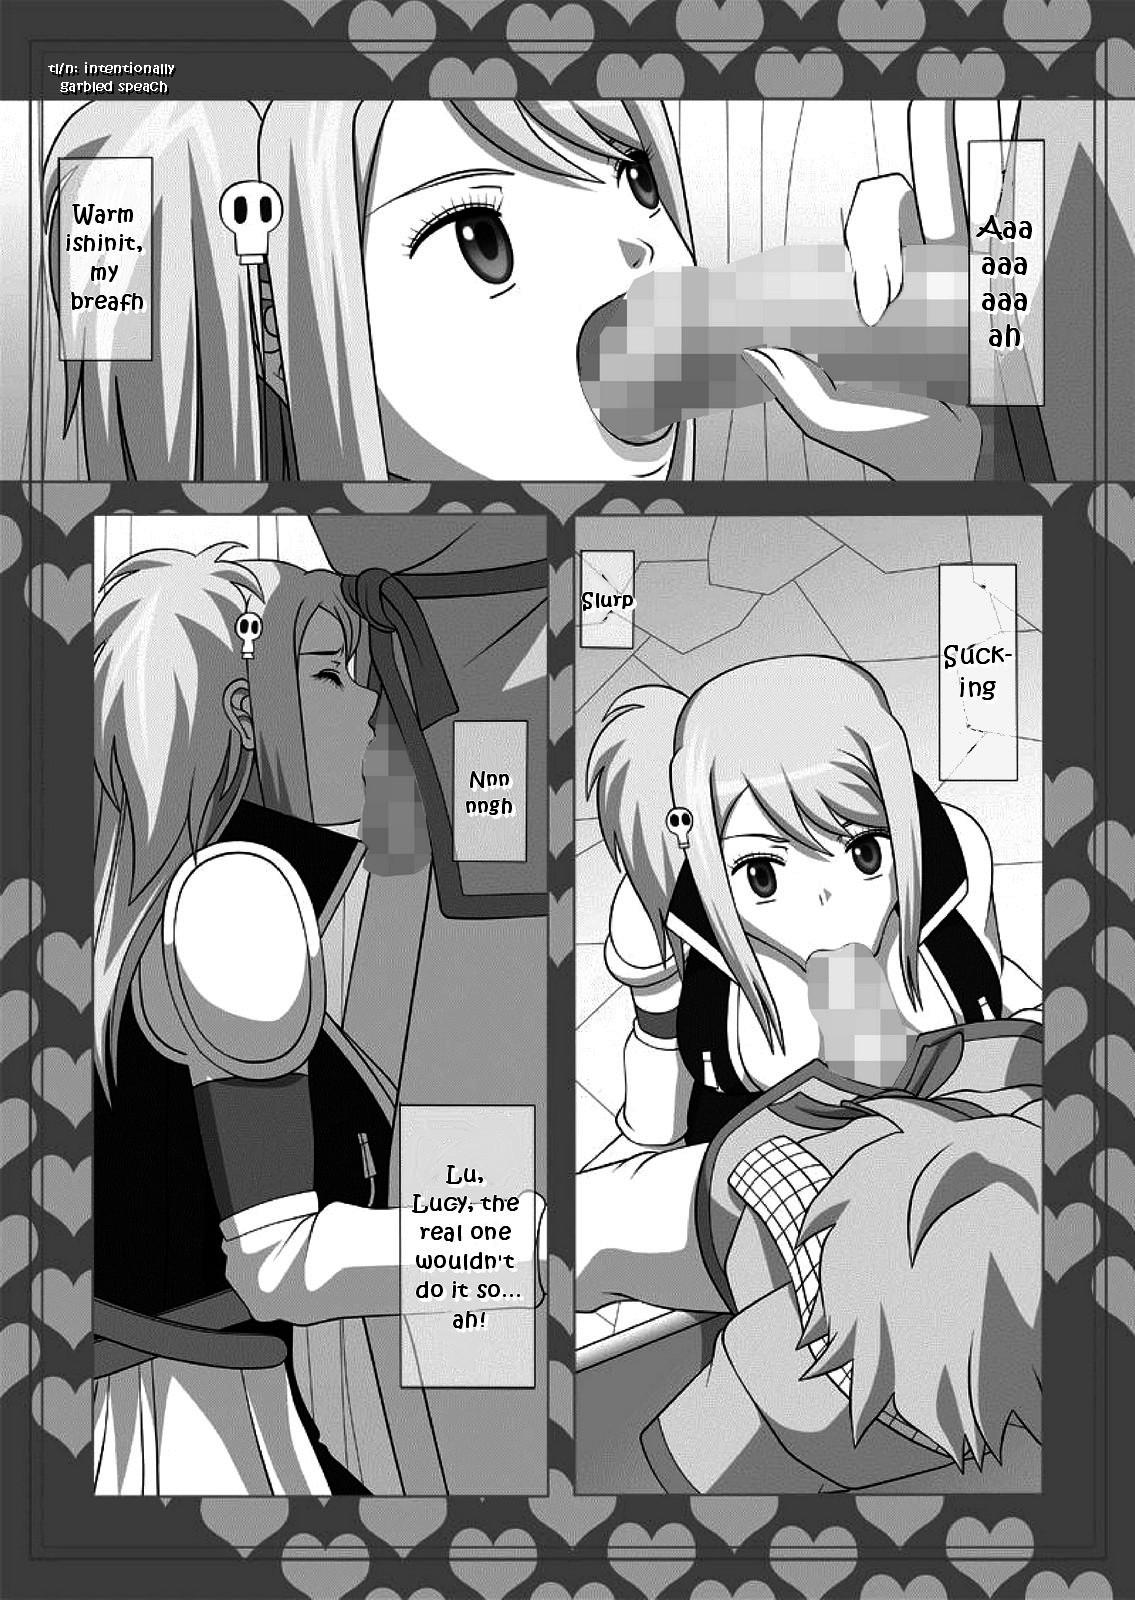 Peruana [NAVY (Kisyuu Naoyuki)] Okuchi no Ehon Vol. 36 Sweethole -Lucy Lucy- | Picture Book of the Mouth Vol. 36 Sweethole -Lucy Lucy- Mouth is Lover (Fairy Tail) [English] [EHCOVE] [Digital] - Fairy tail Cum On Face - Page 6